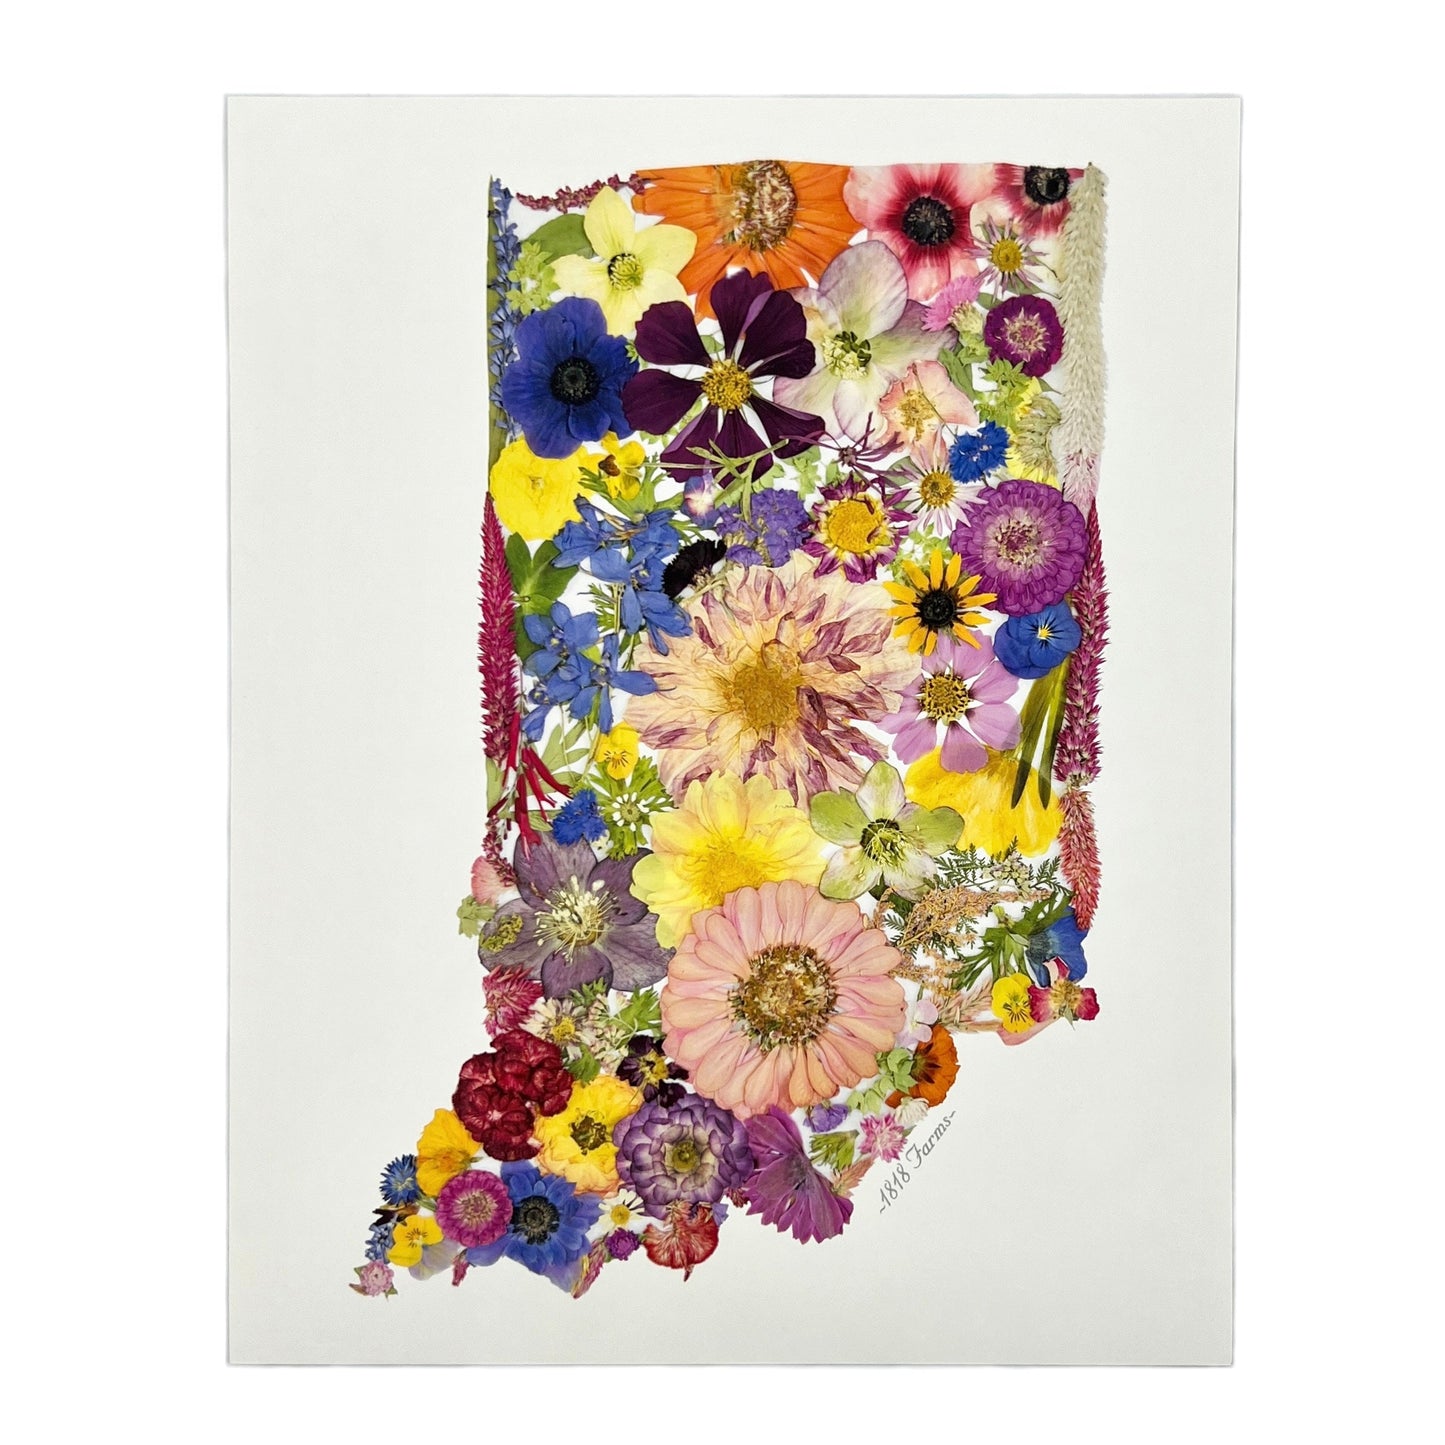 State Themed Giclée Print  - "Where I Bloom" Collection Giclee Art Print 1818 Farms 8"x10" Indiana 